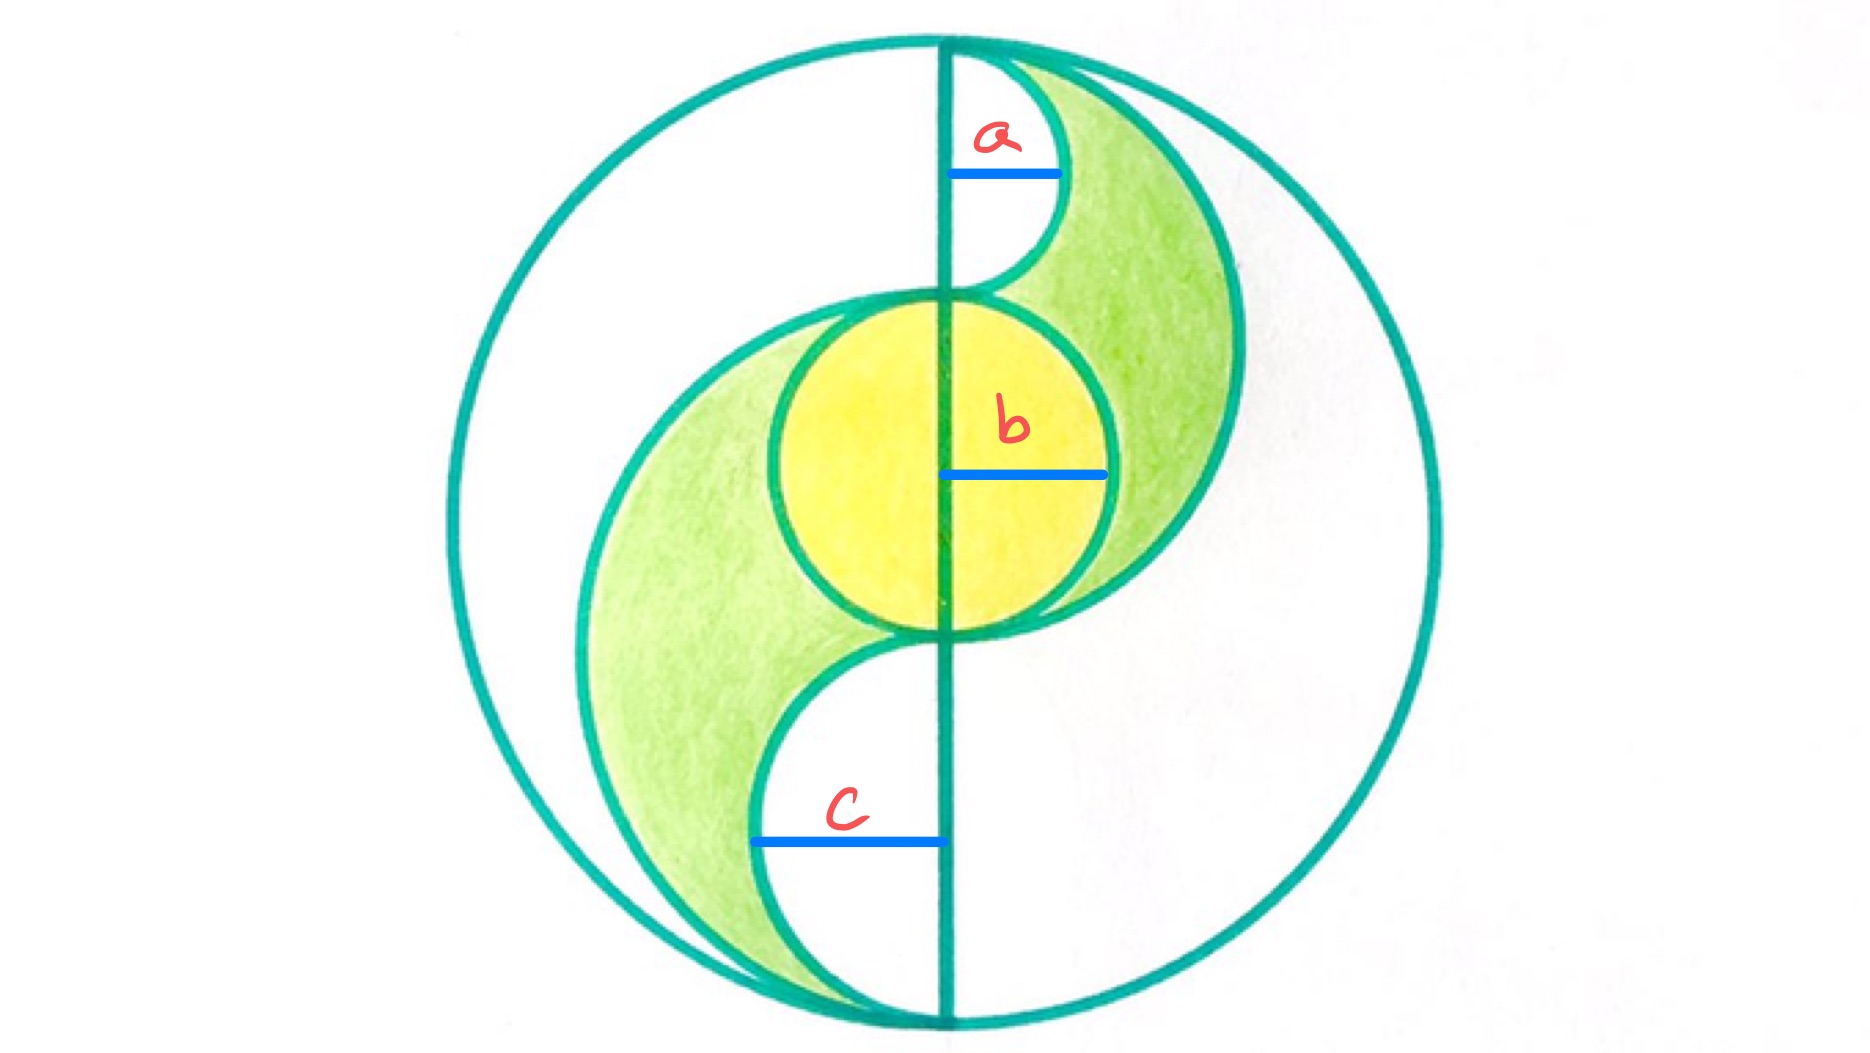 Multiple semi-circles in a circle labelled